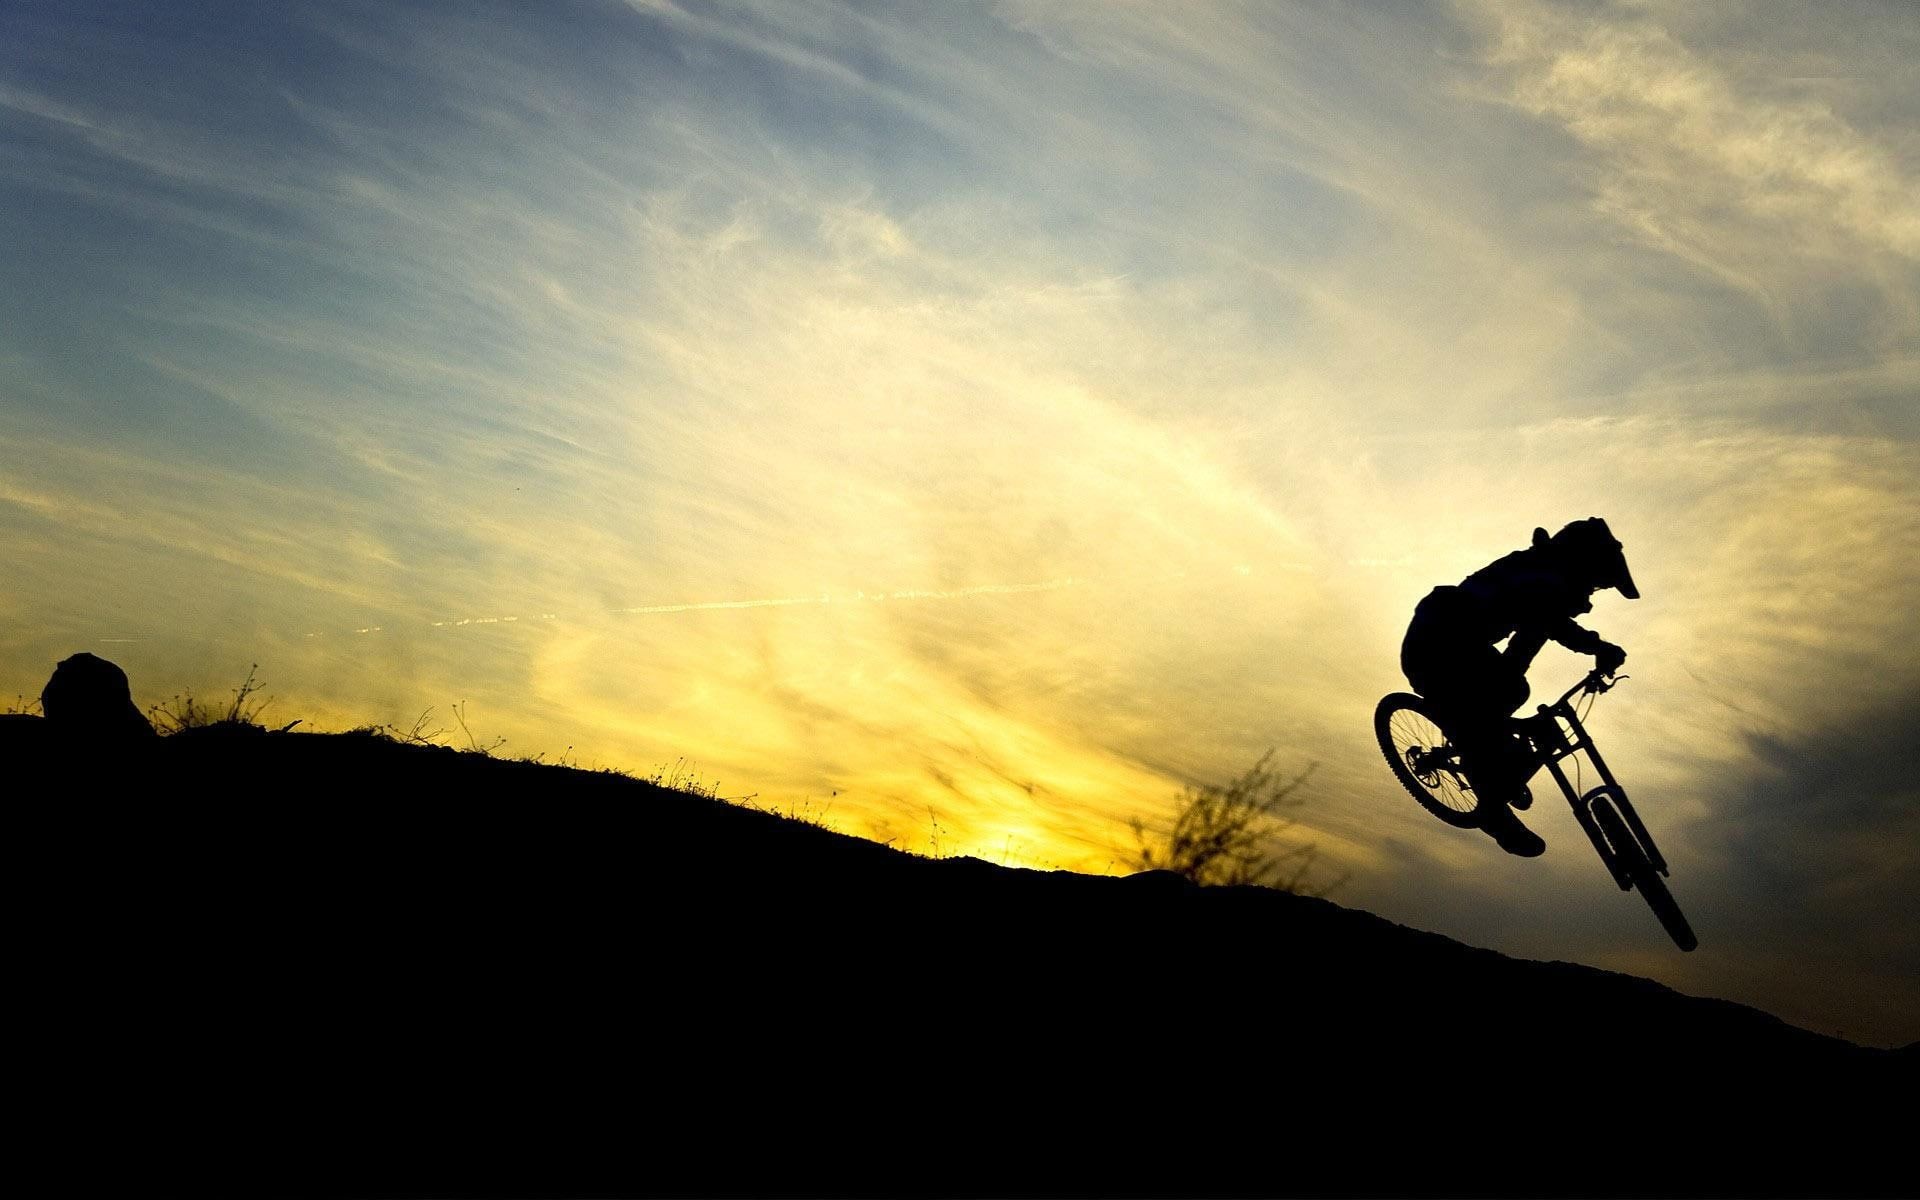 BMX (Sports): BMX Freestyle Alone, Texas, Austin Is The Perfect Place For BMX. 1920x1200 HD Wallpaper.